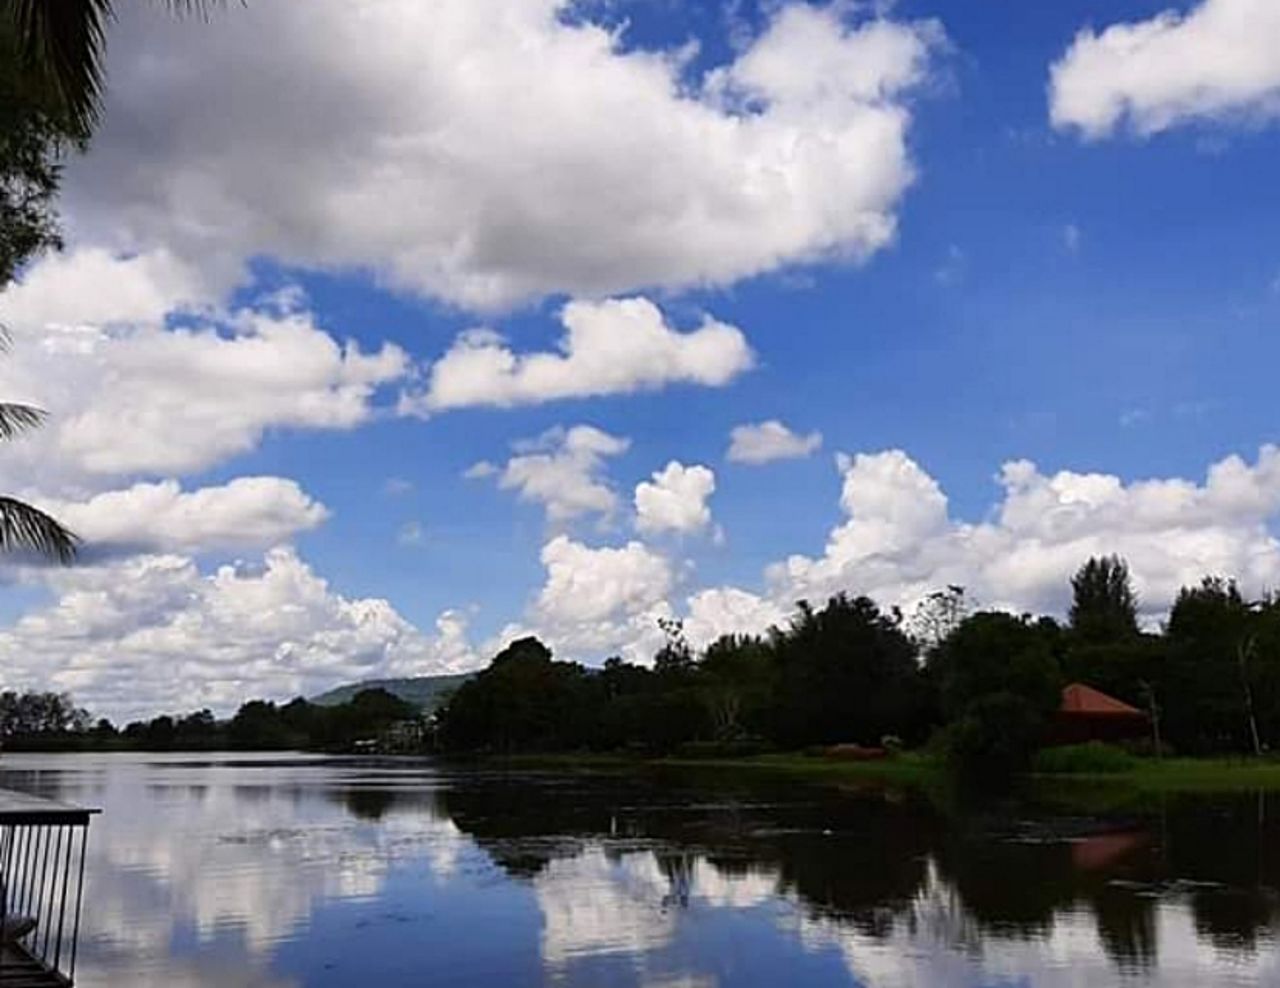 reflection, water, cloud, sky, lake, tree, nature, beauty in nature, scenics - nature, plant, tranquility, environment, body of water, landscape, no people, tranquil scene, travel destinations, blue, travel, tourism, outdoors, day, trip, vacation, mountain, non-urban scene, reservoir, land, holiday, idyllic, forest, reflection lake